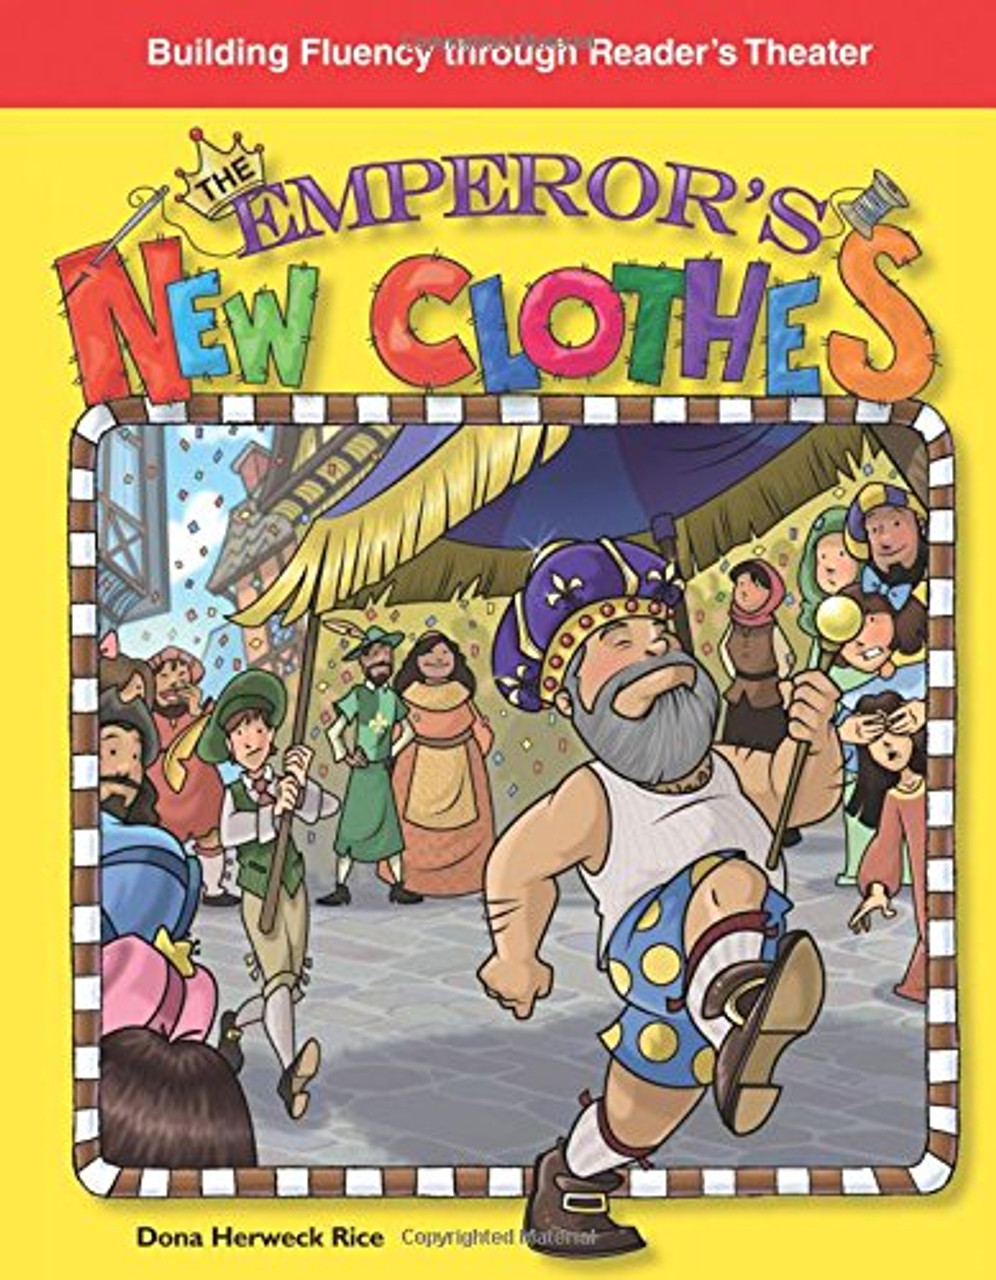 The Emperor's New Clothes by Dona Herweck Rice